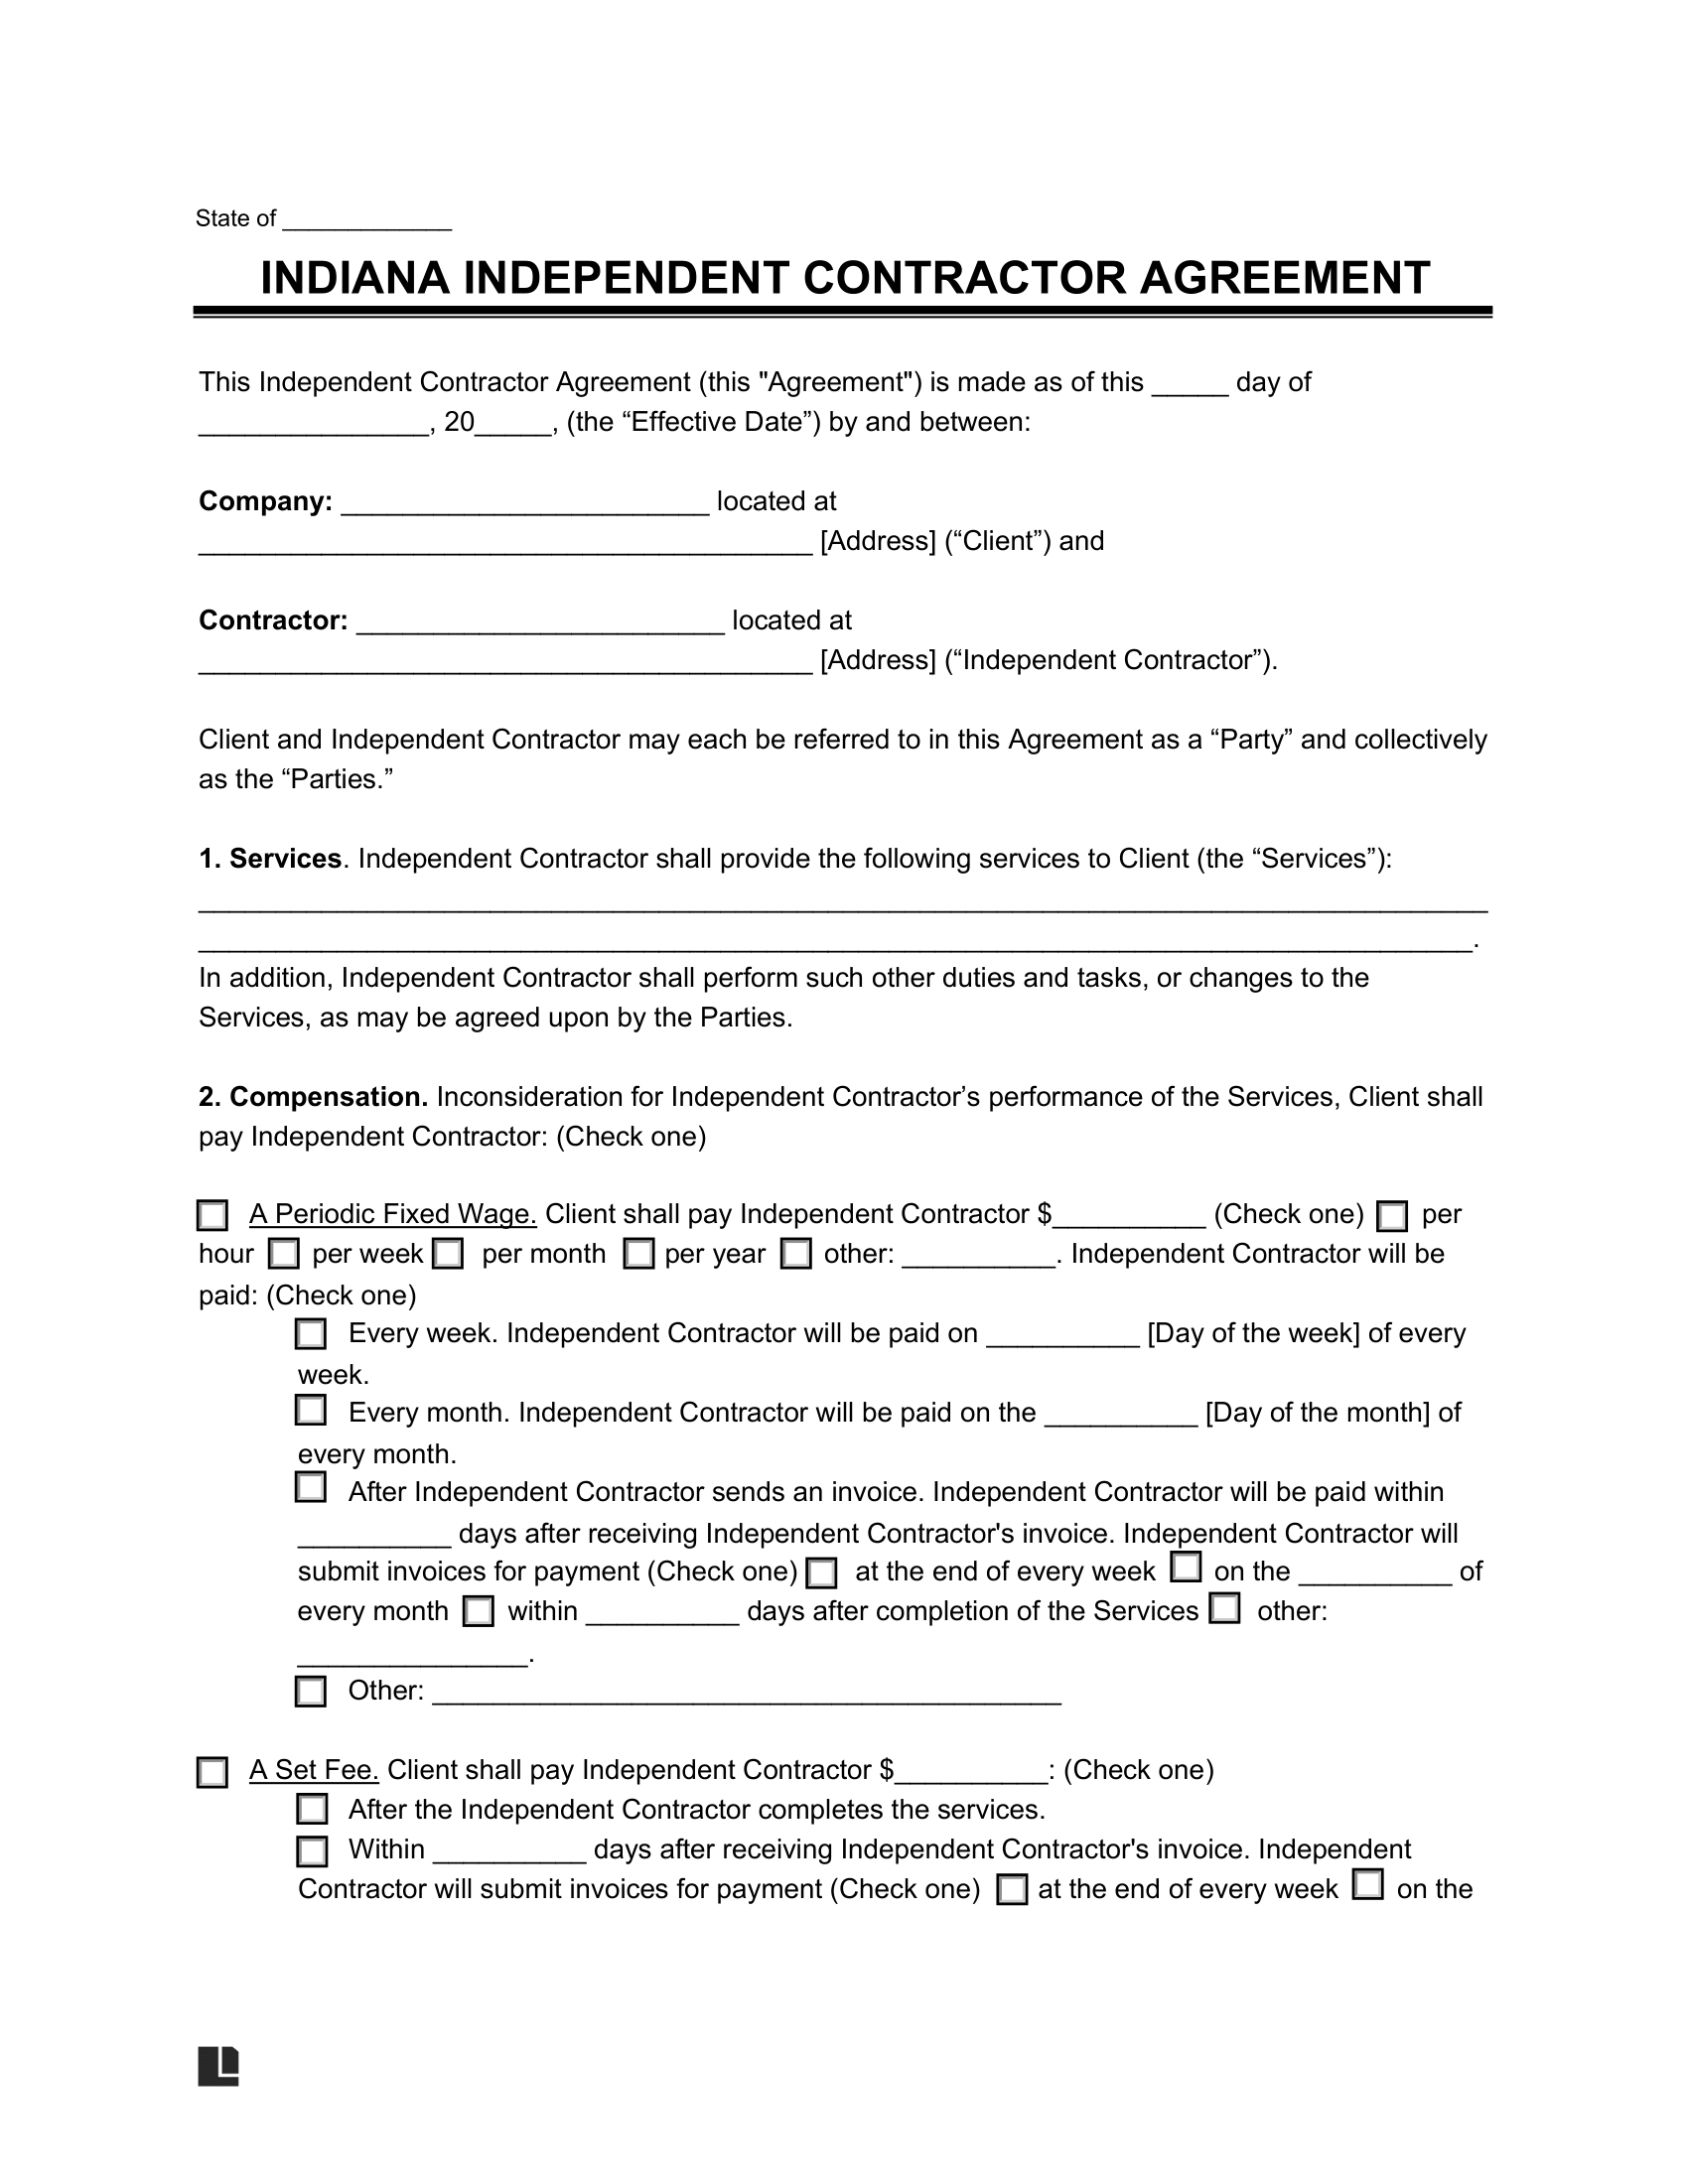 Indiana Independent Contractor Agreement Template